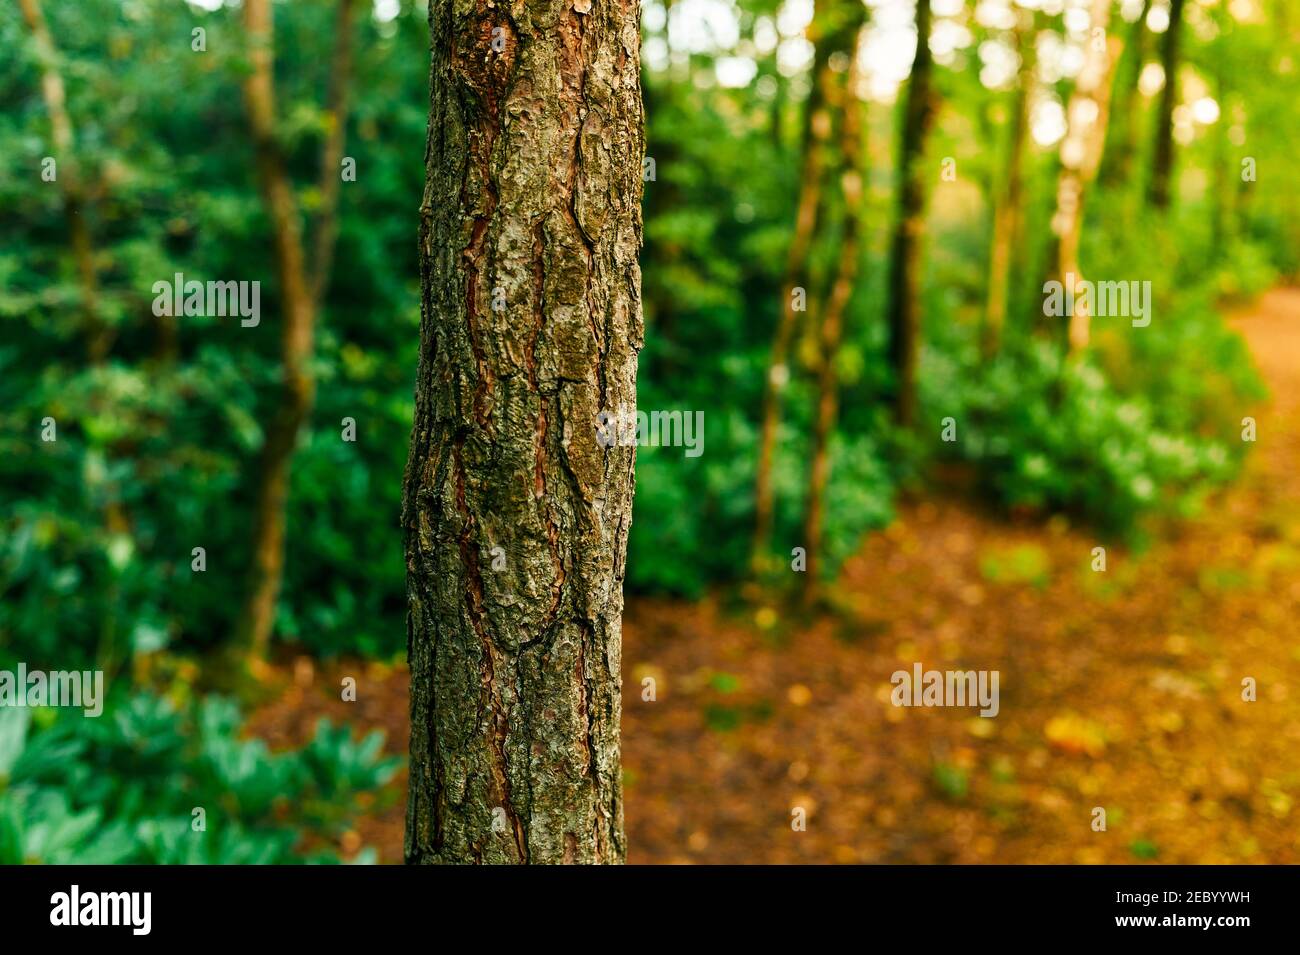 A tree in the forest on a sunny autumn day Stock Photo